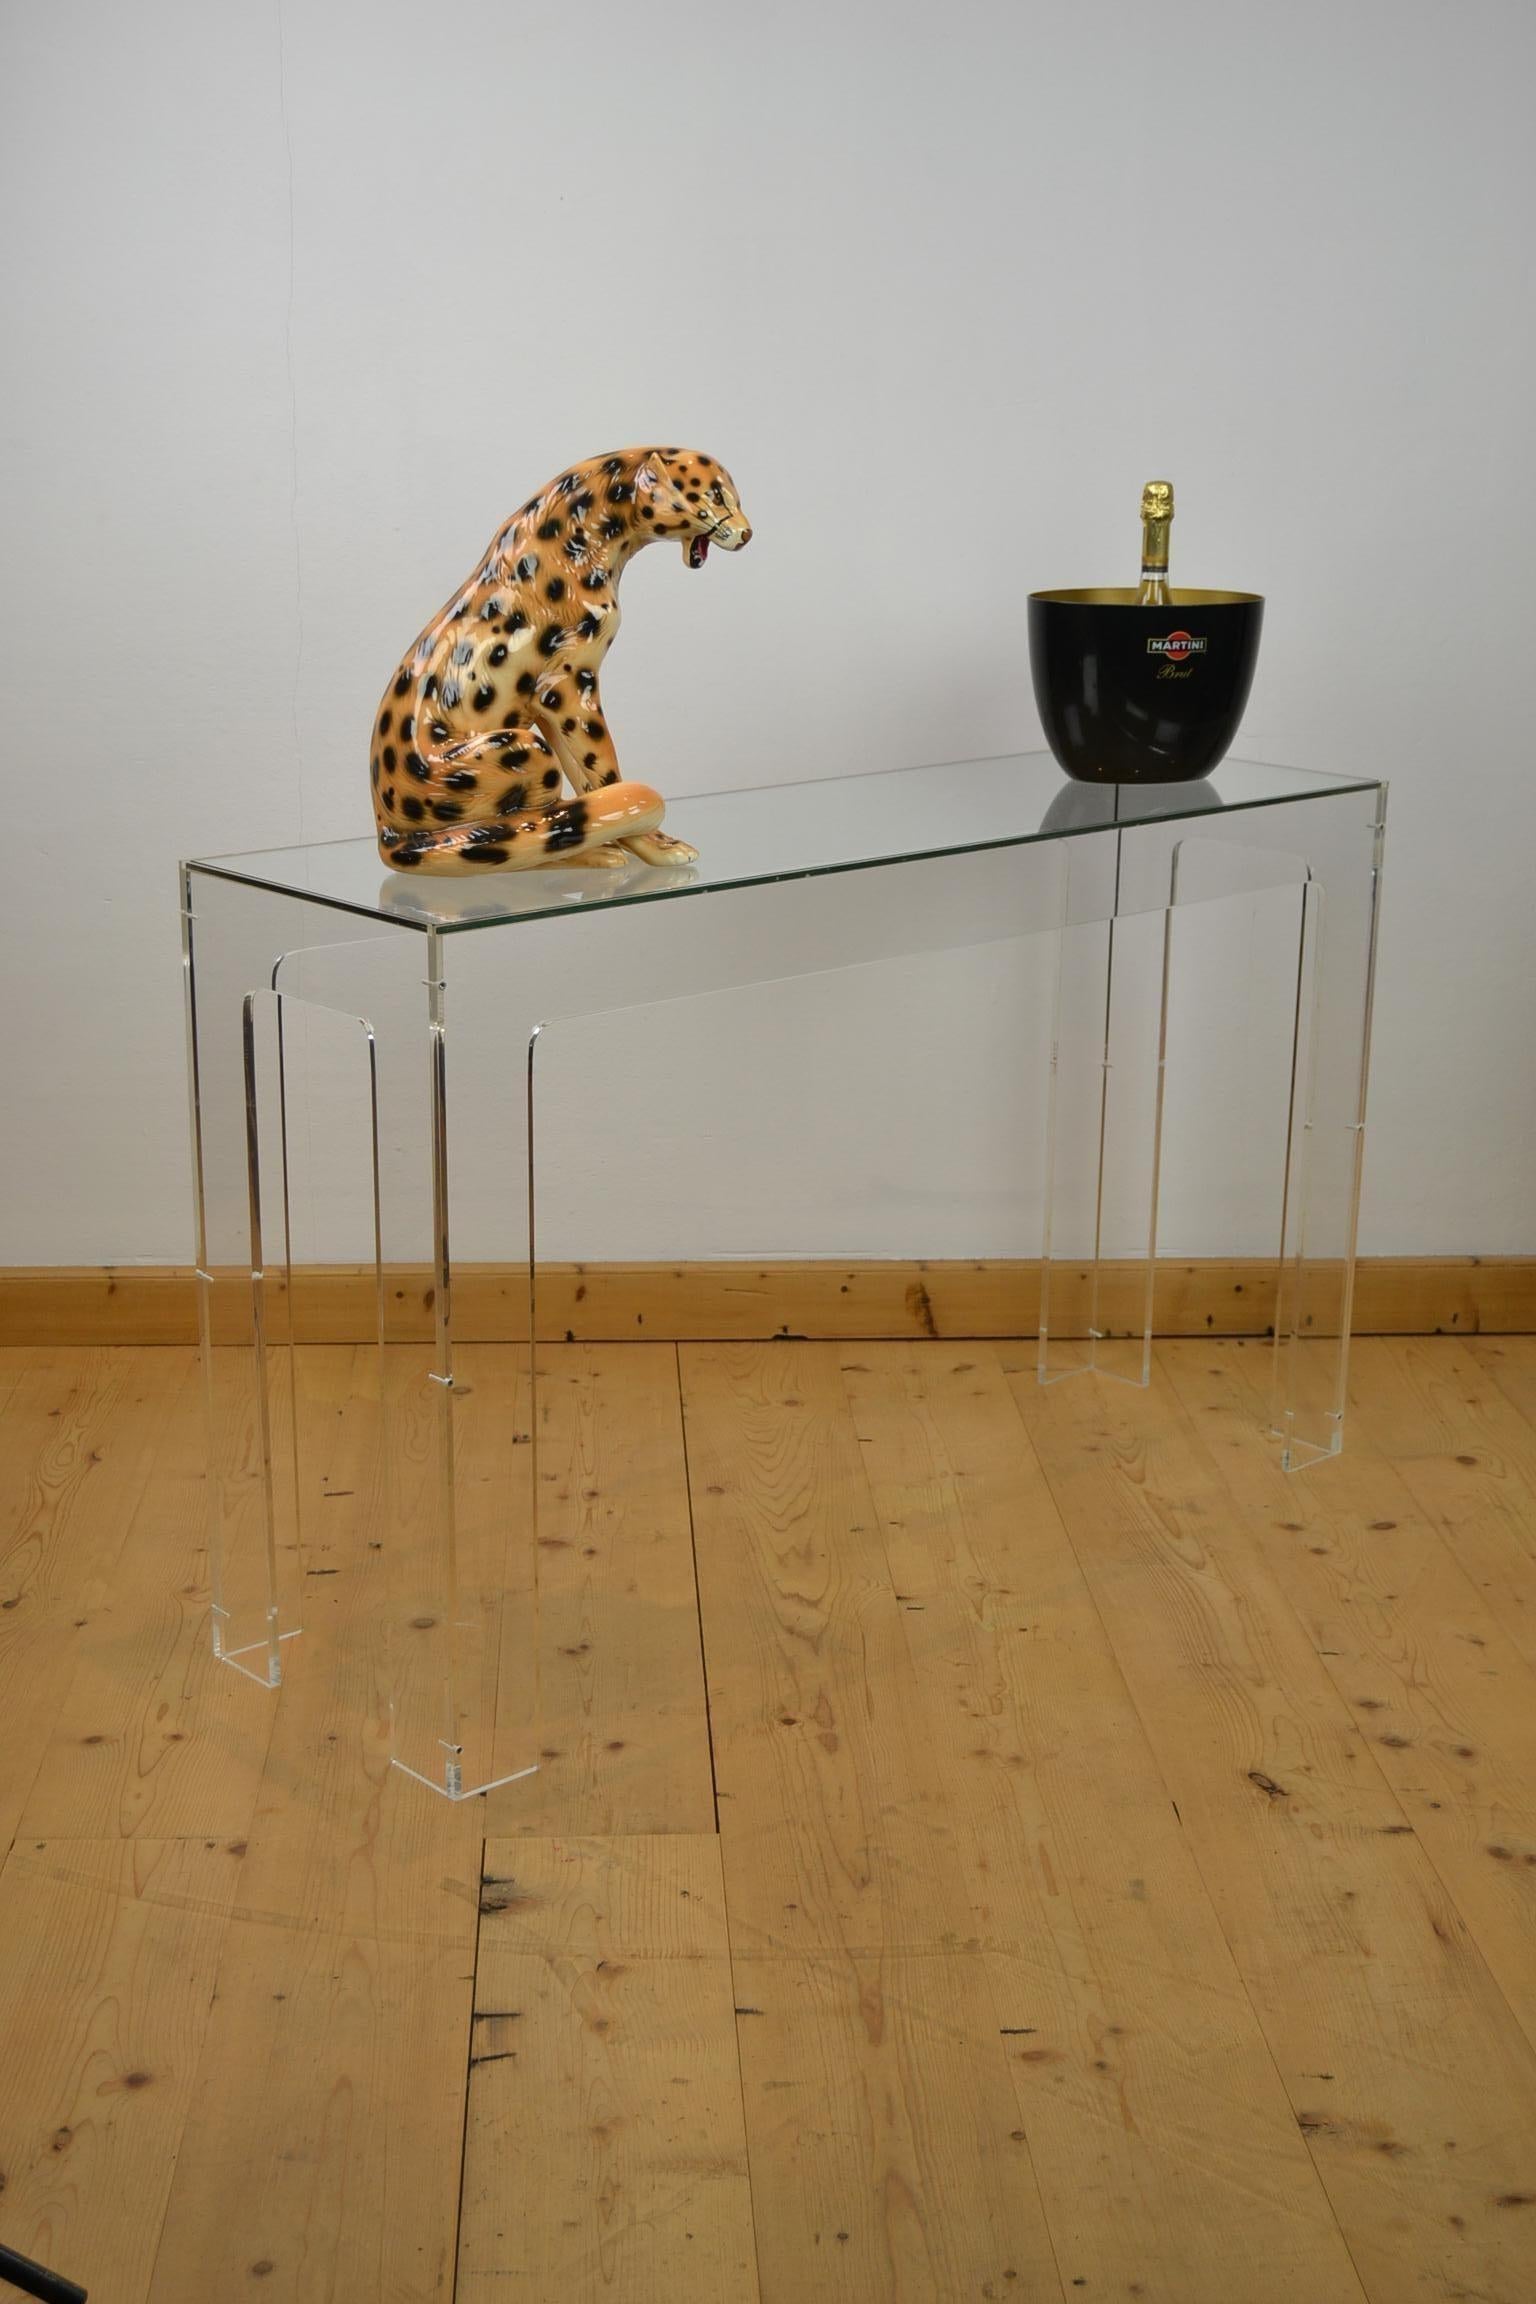 Vintage Lucite - plexiglass or acrylic console table with thick glass table top. 
This console table - side table or dresser dates circa 1970s.

Because of the material and minimalistic design, 
this kind of console tables fit great in a Modern